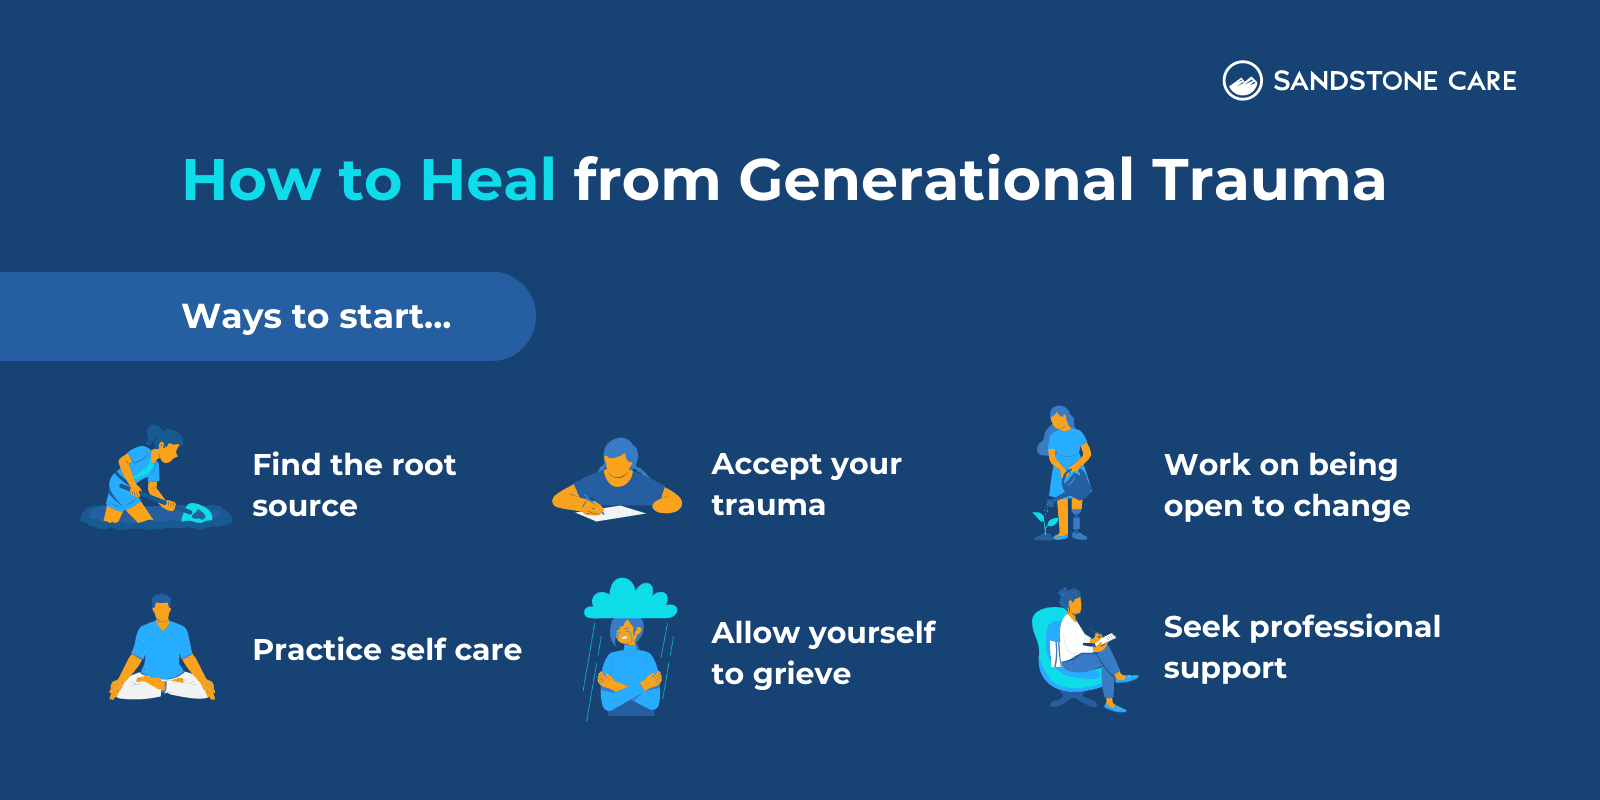 How to heal from generational trauma infographic